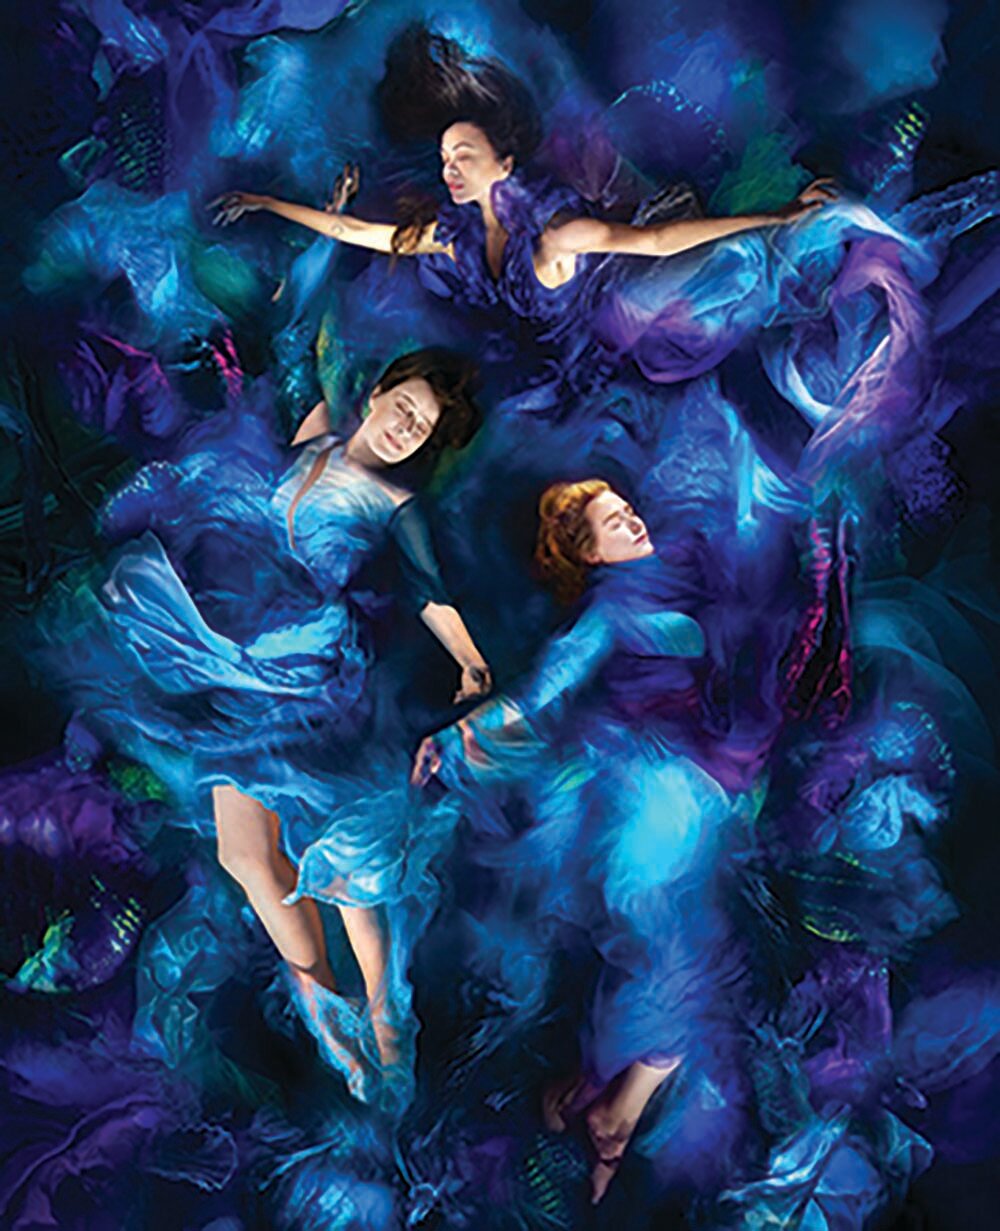 Zoe Saldaña, Sigourney Weaver and Kate Winslet, stars of 20th Century Studios’ “Avatar: The Way of Water”, posed for renowned underwater photographer Christy Lee Rogers for a series of photographs celebrating our oceans to raise funds to support The Nature Conservancy (TNC).